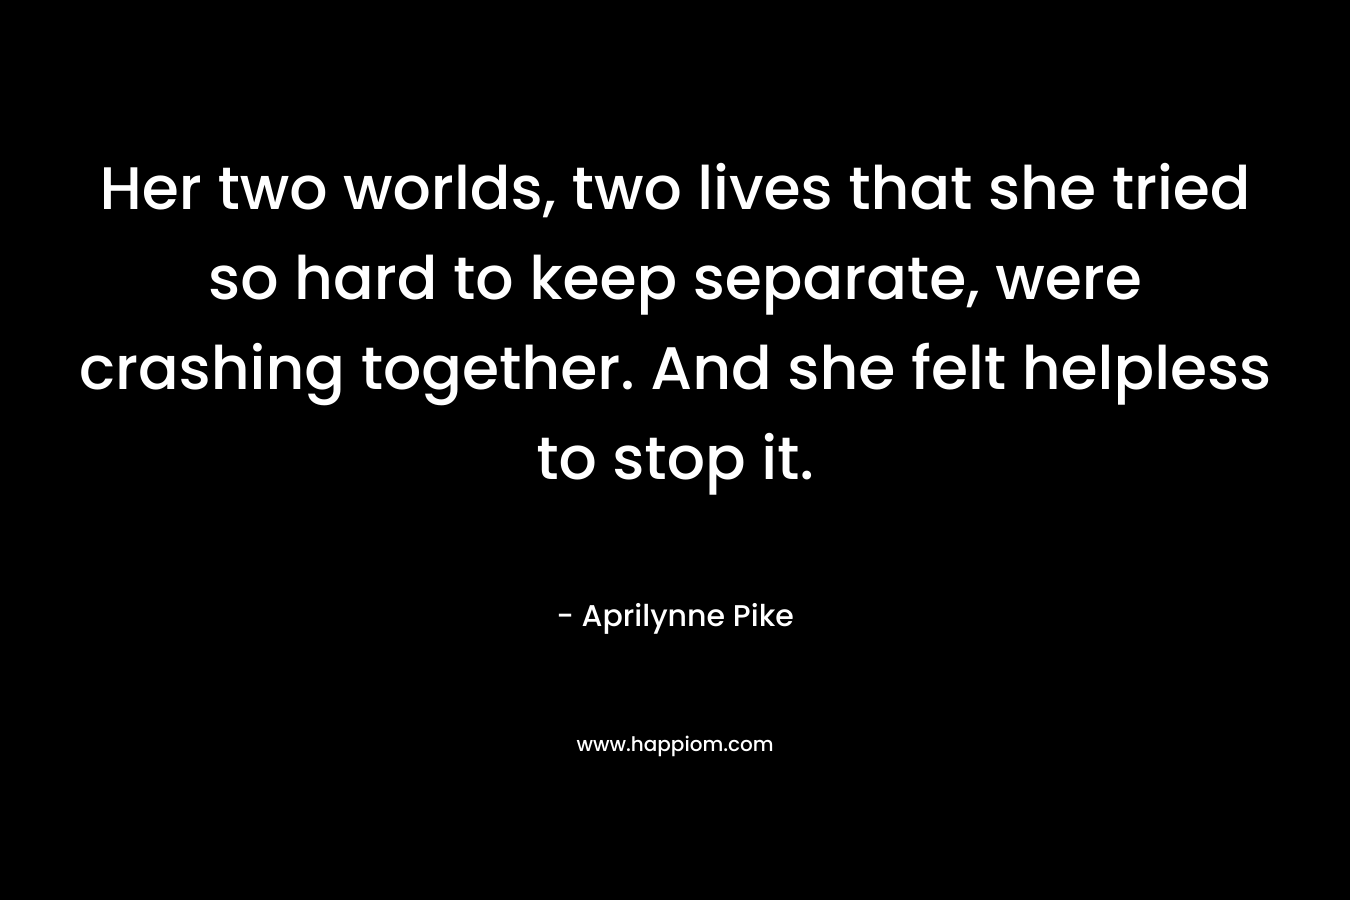 Her two worlds, two lives that she tried so hard to keep separate, were crashing together. And she felt helpless to stop it. – Aprilynne Pike